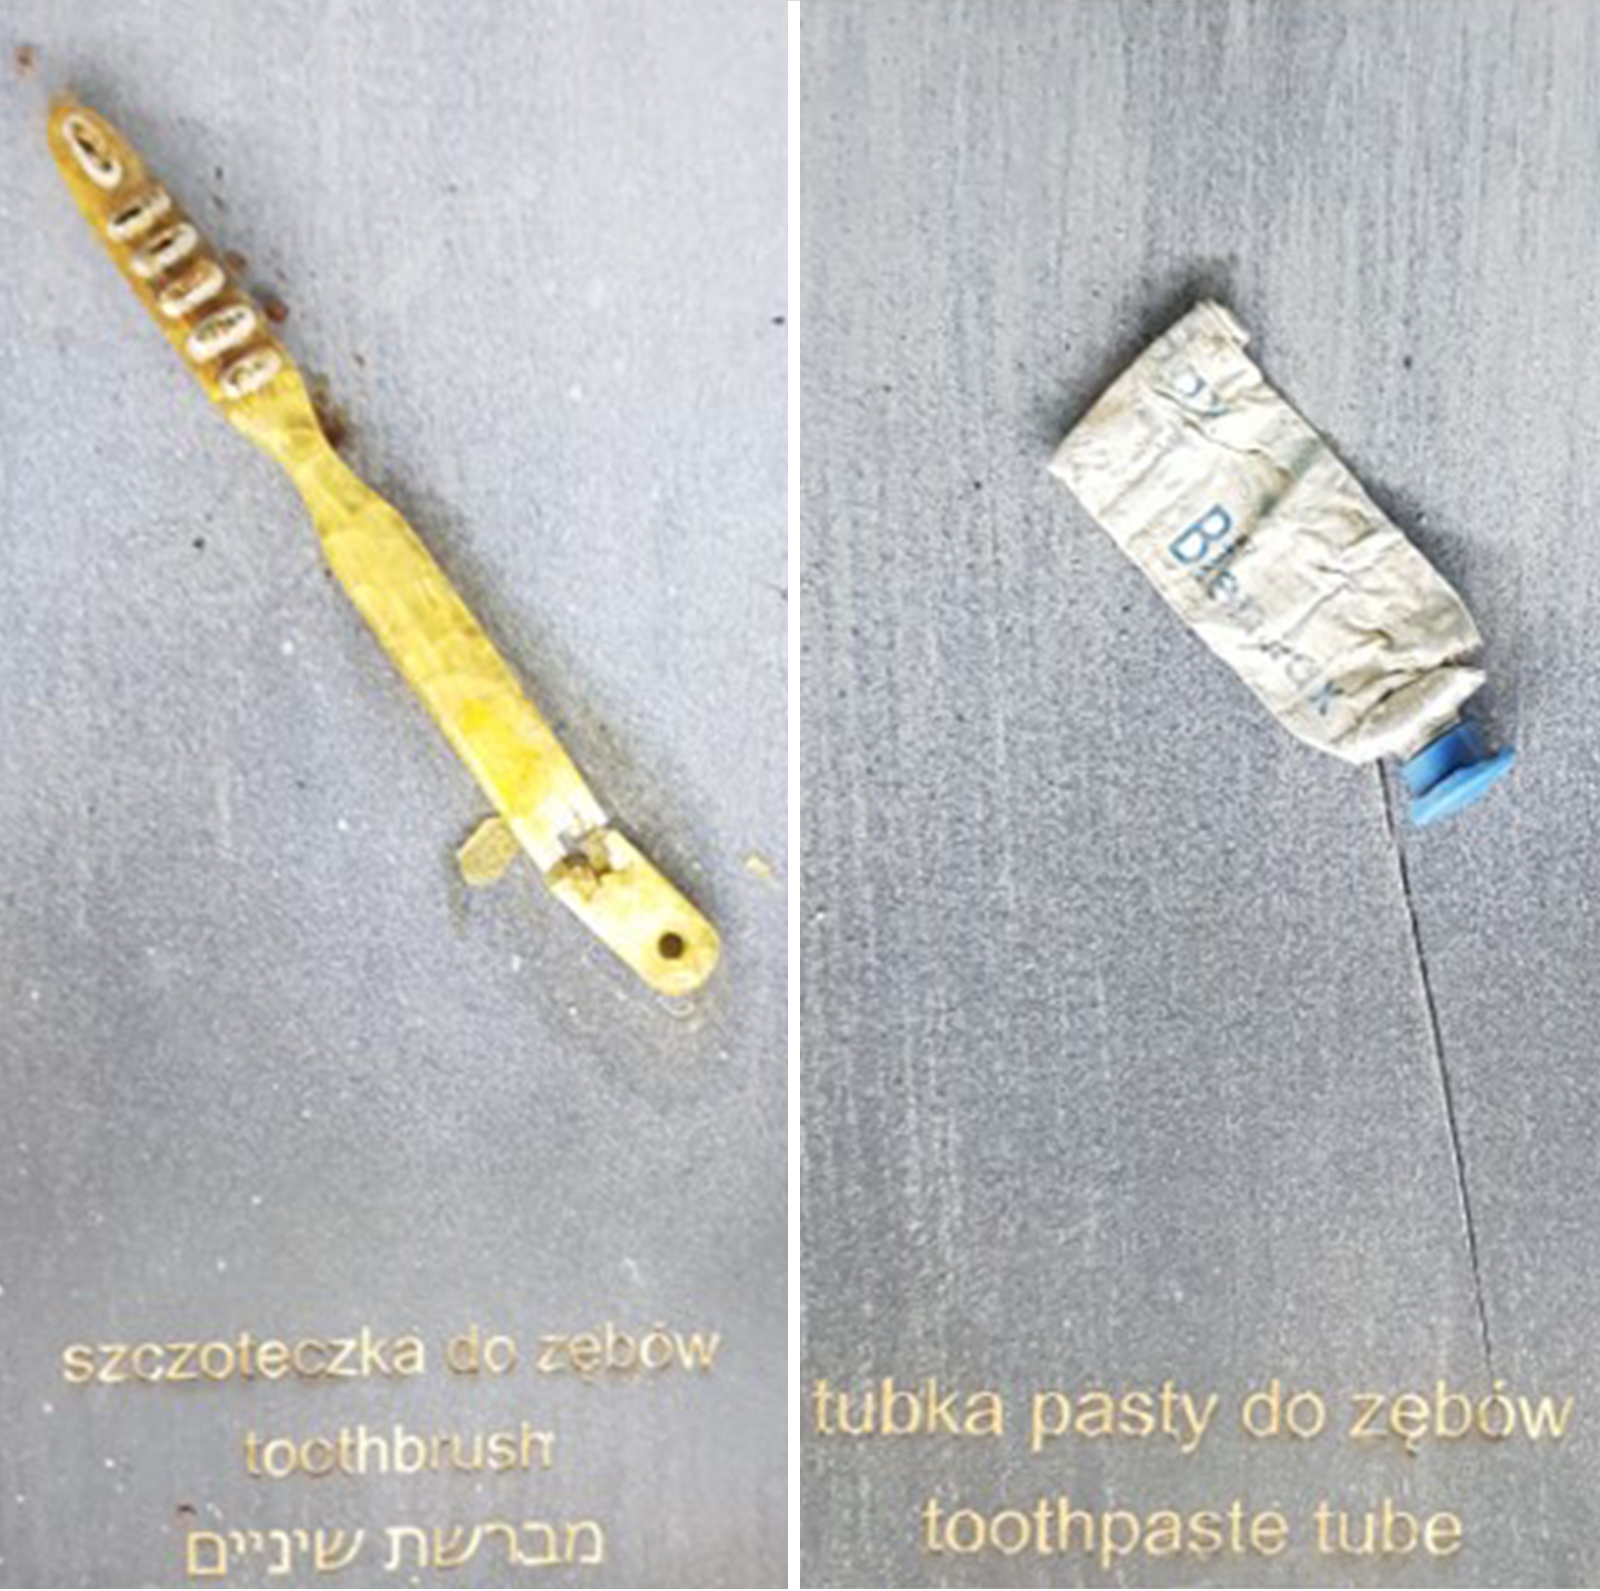 Toothbrush & Toothpaste found at the Chelmno Killing site